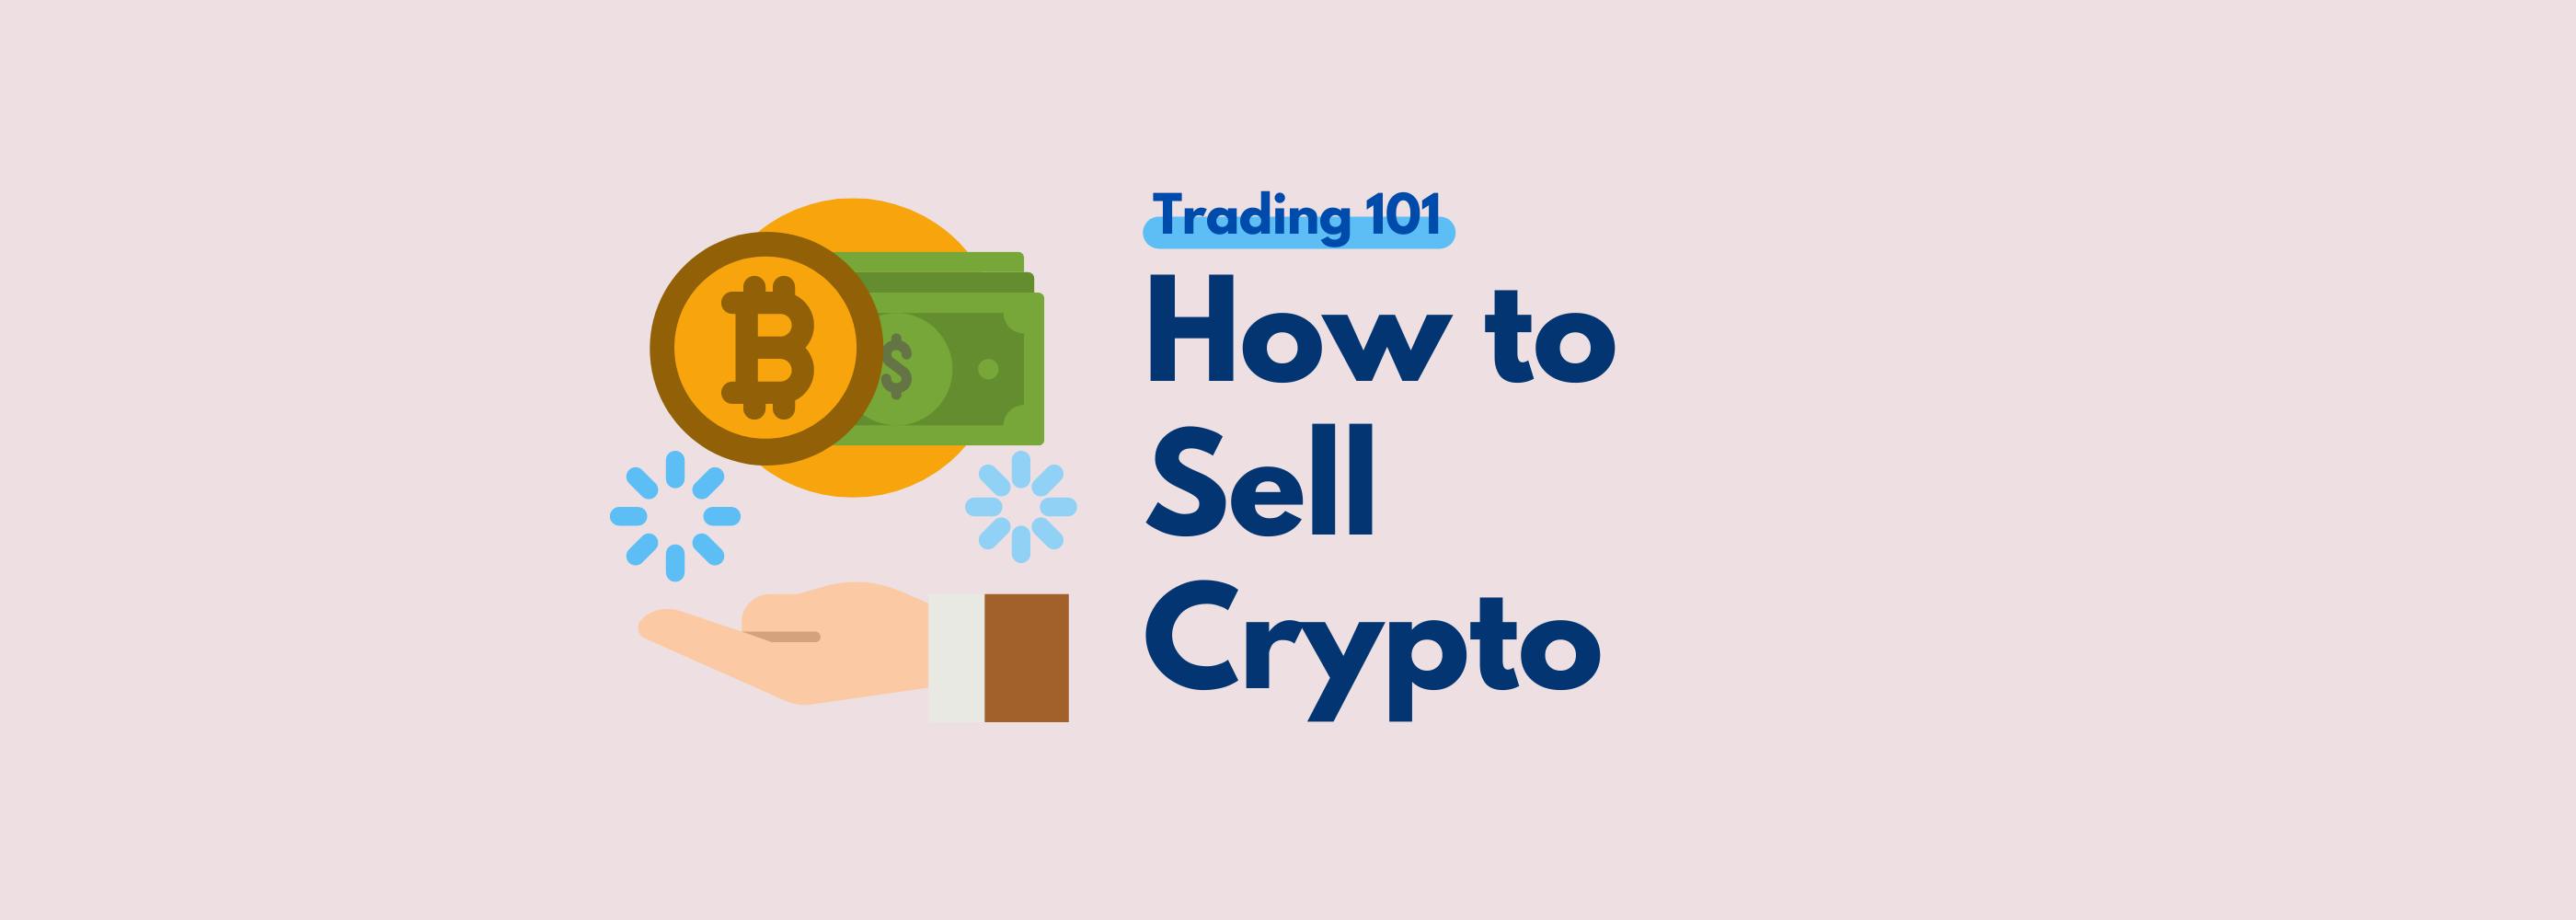 How to sell crypto